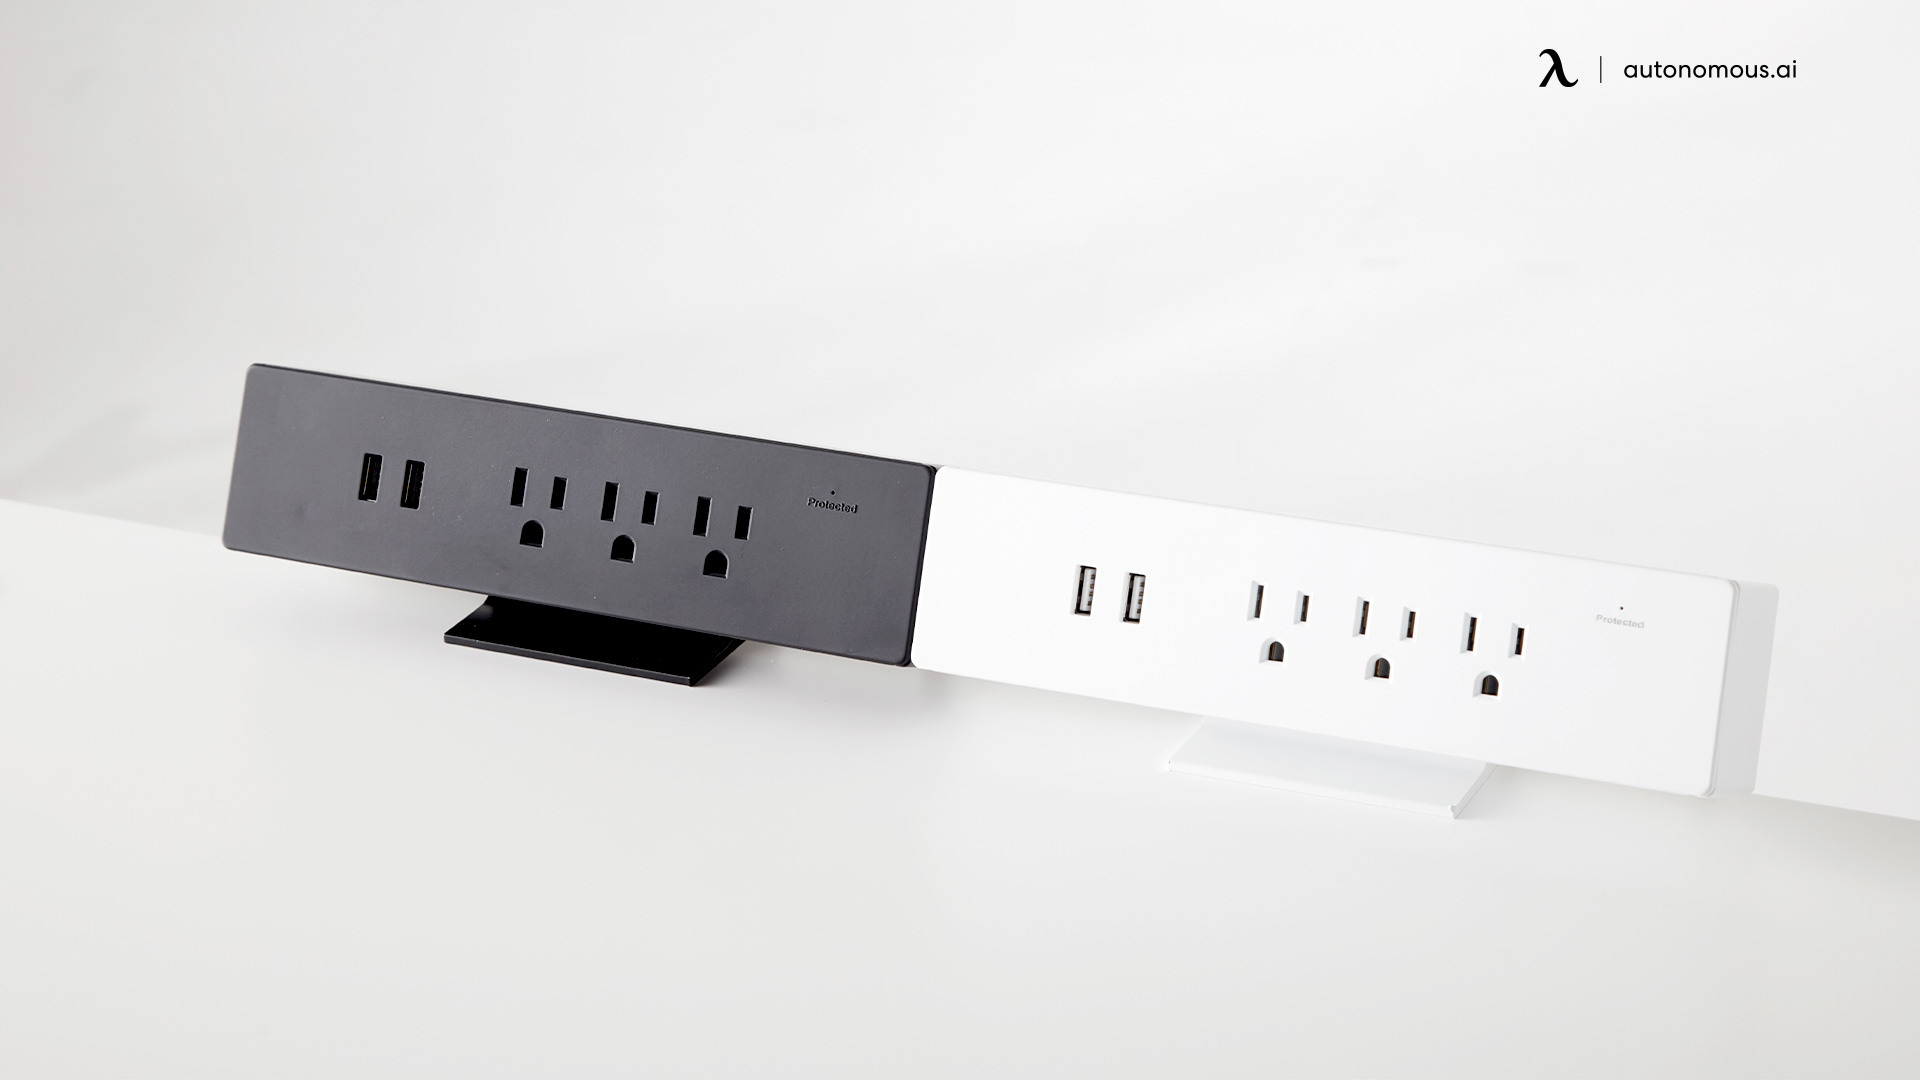 A Power Outlet for home office on a budget